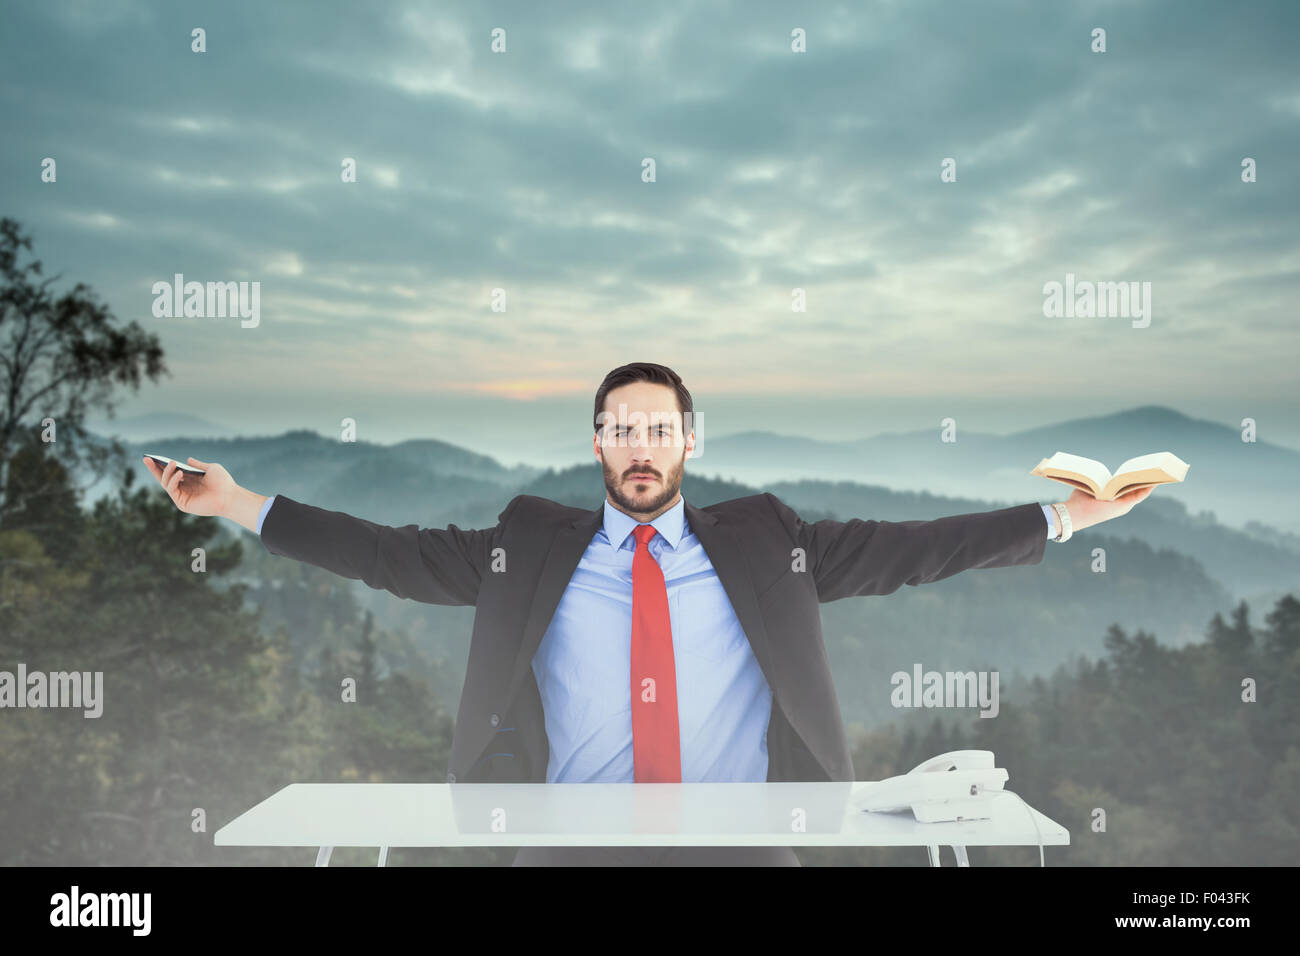 Composite image of unsmiling businessman sitting with arms outstretched Stock Photo